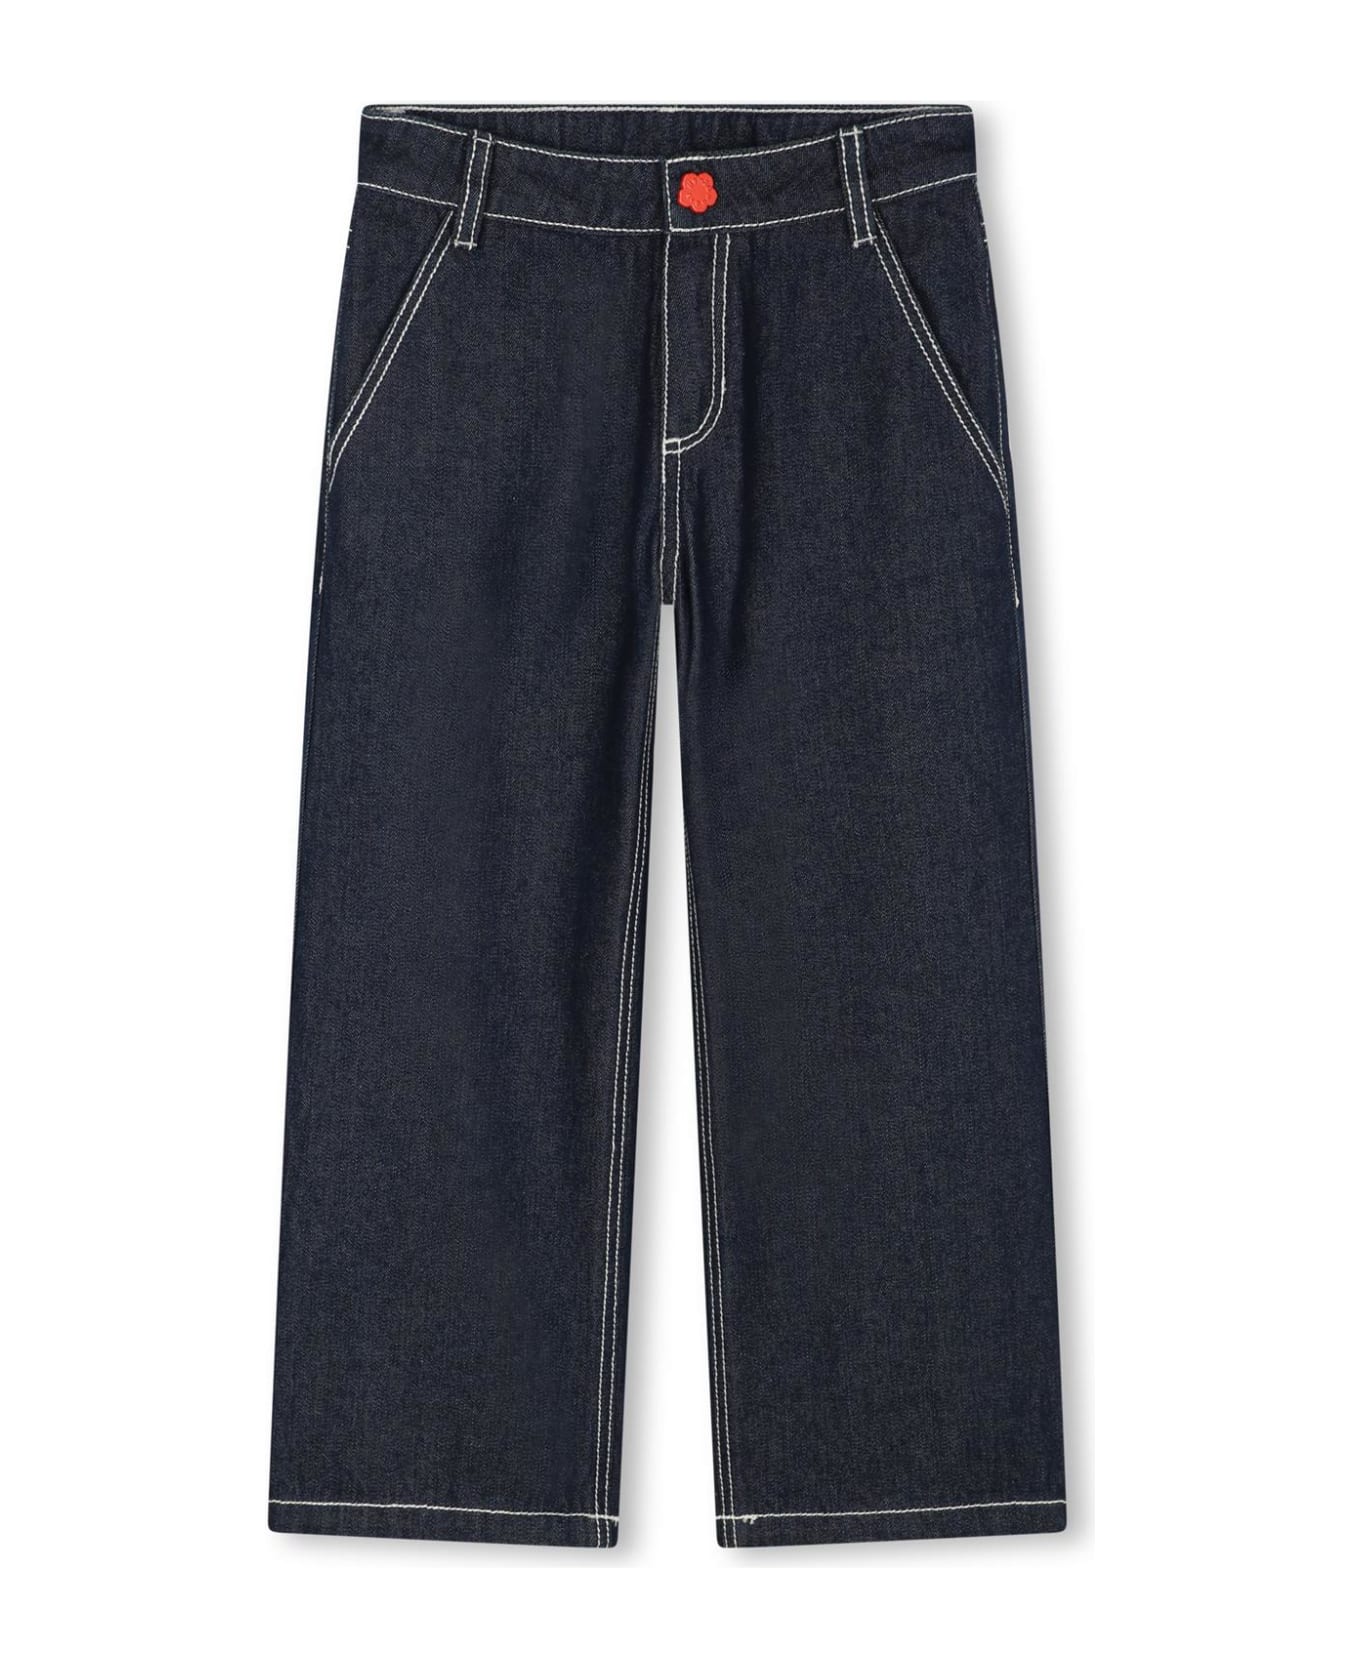 Kenzo Kids Jeans Dritti Con Stampa - Blue ボトムス